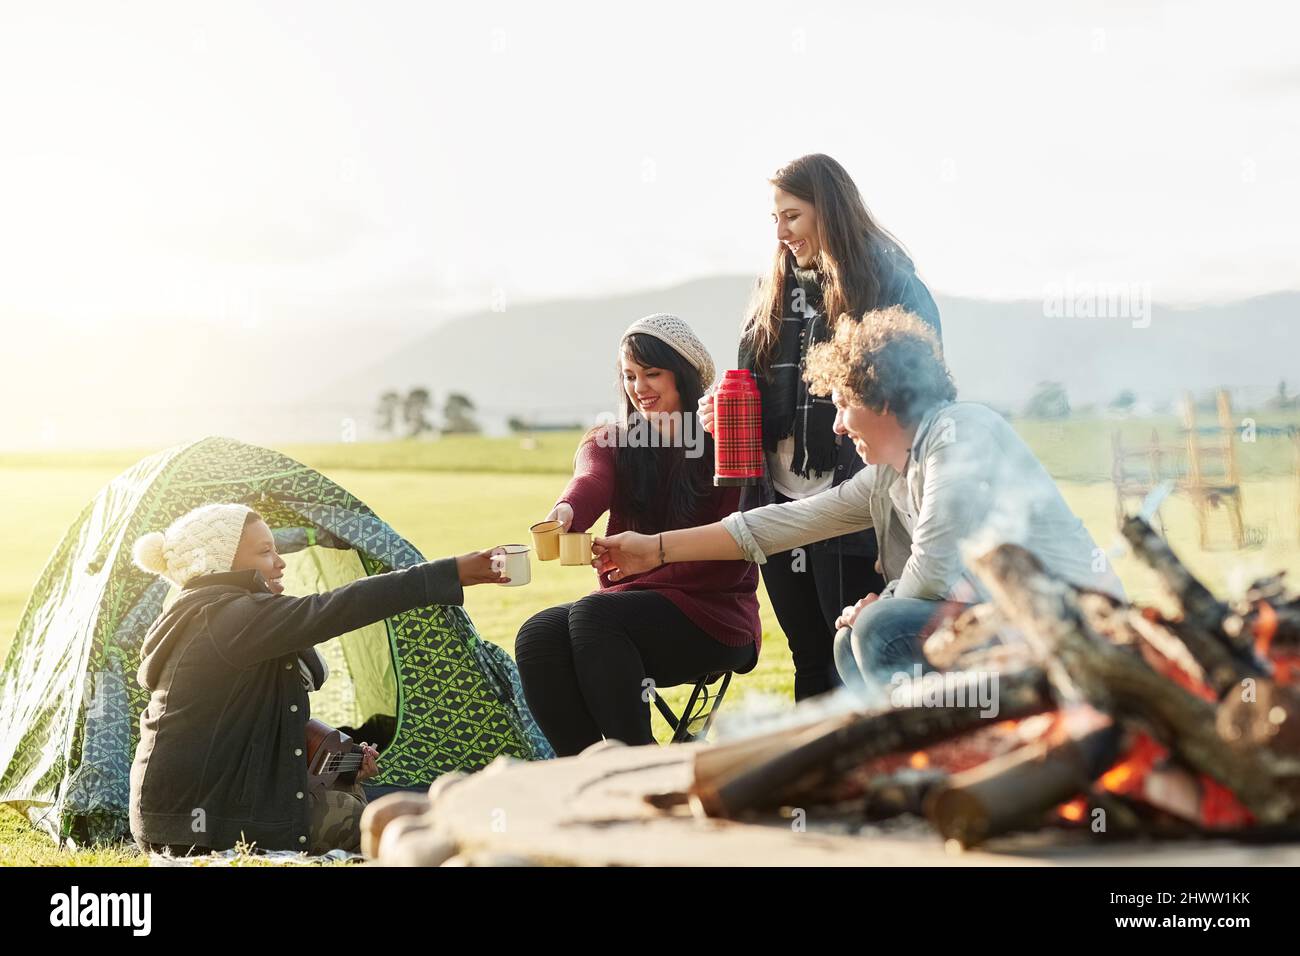 https://c8.alamy.com/comp/2HWW1KK/camp-coffee-is-the-best-coffee-shot-of-a-group-of-young-friends-enjoying-coffee-by-the-fire-while-on-a-camping-trip-2HWW1KK.jpg